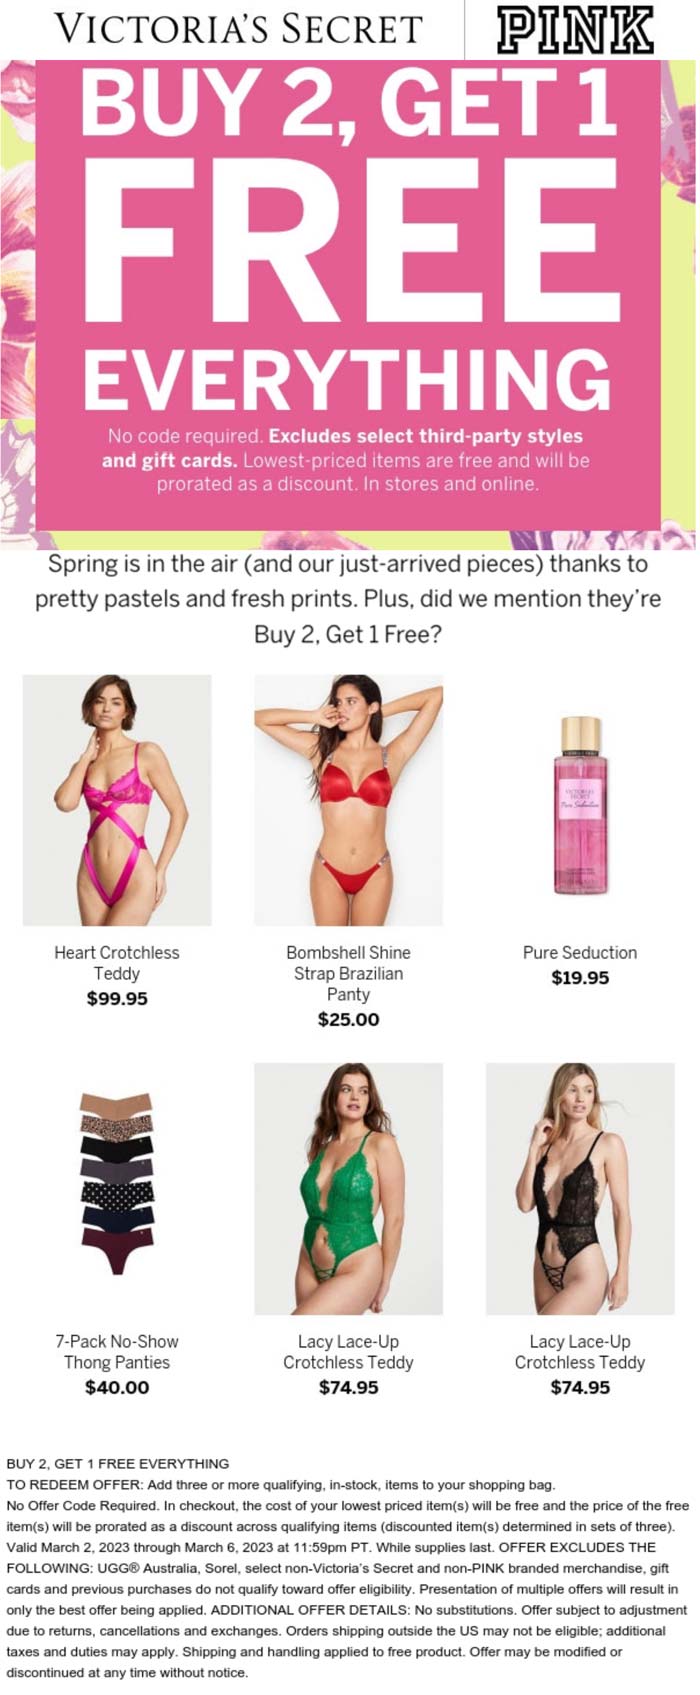 PINK stores Coupon  3rd item free on everything at Victorias Secret & PINK #pink 